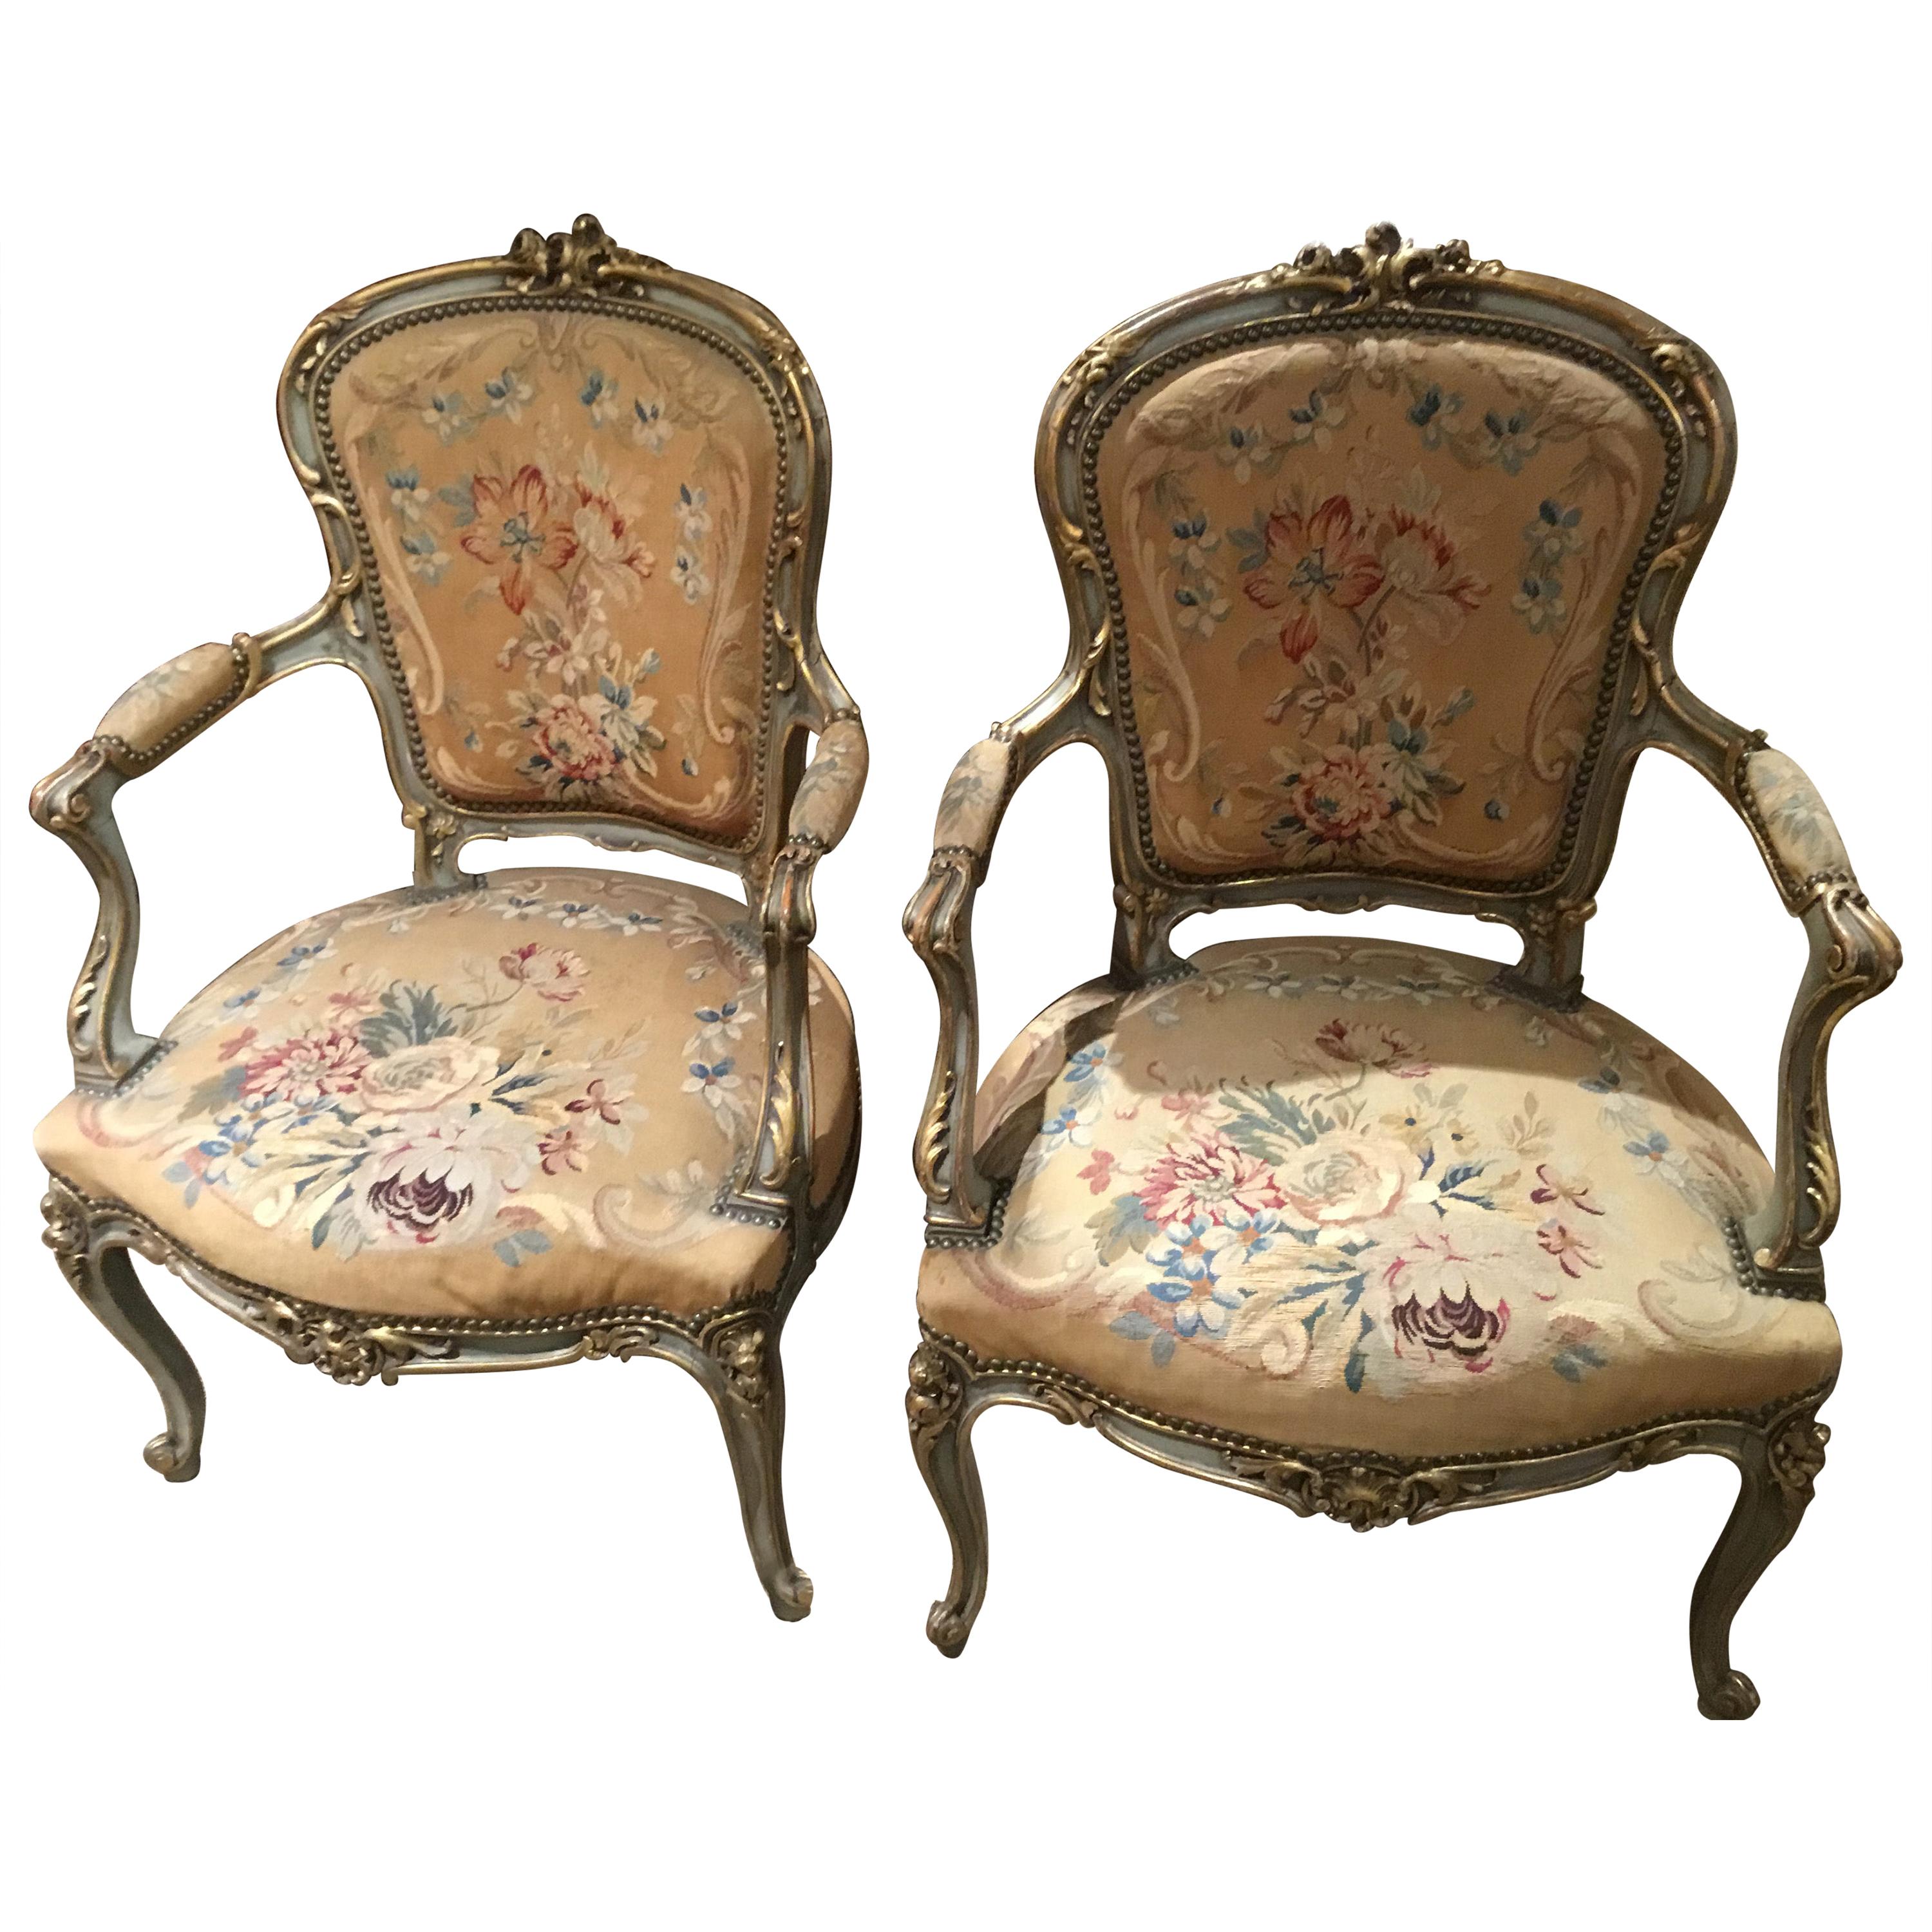 Pair of French Louis XV-Style Armchairs, 19th Century, Original Tapestry